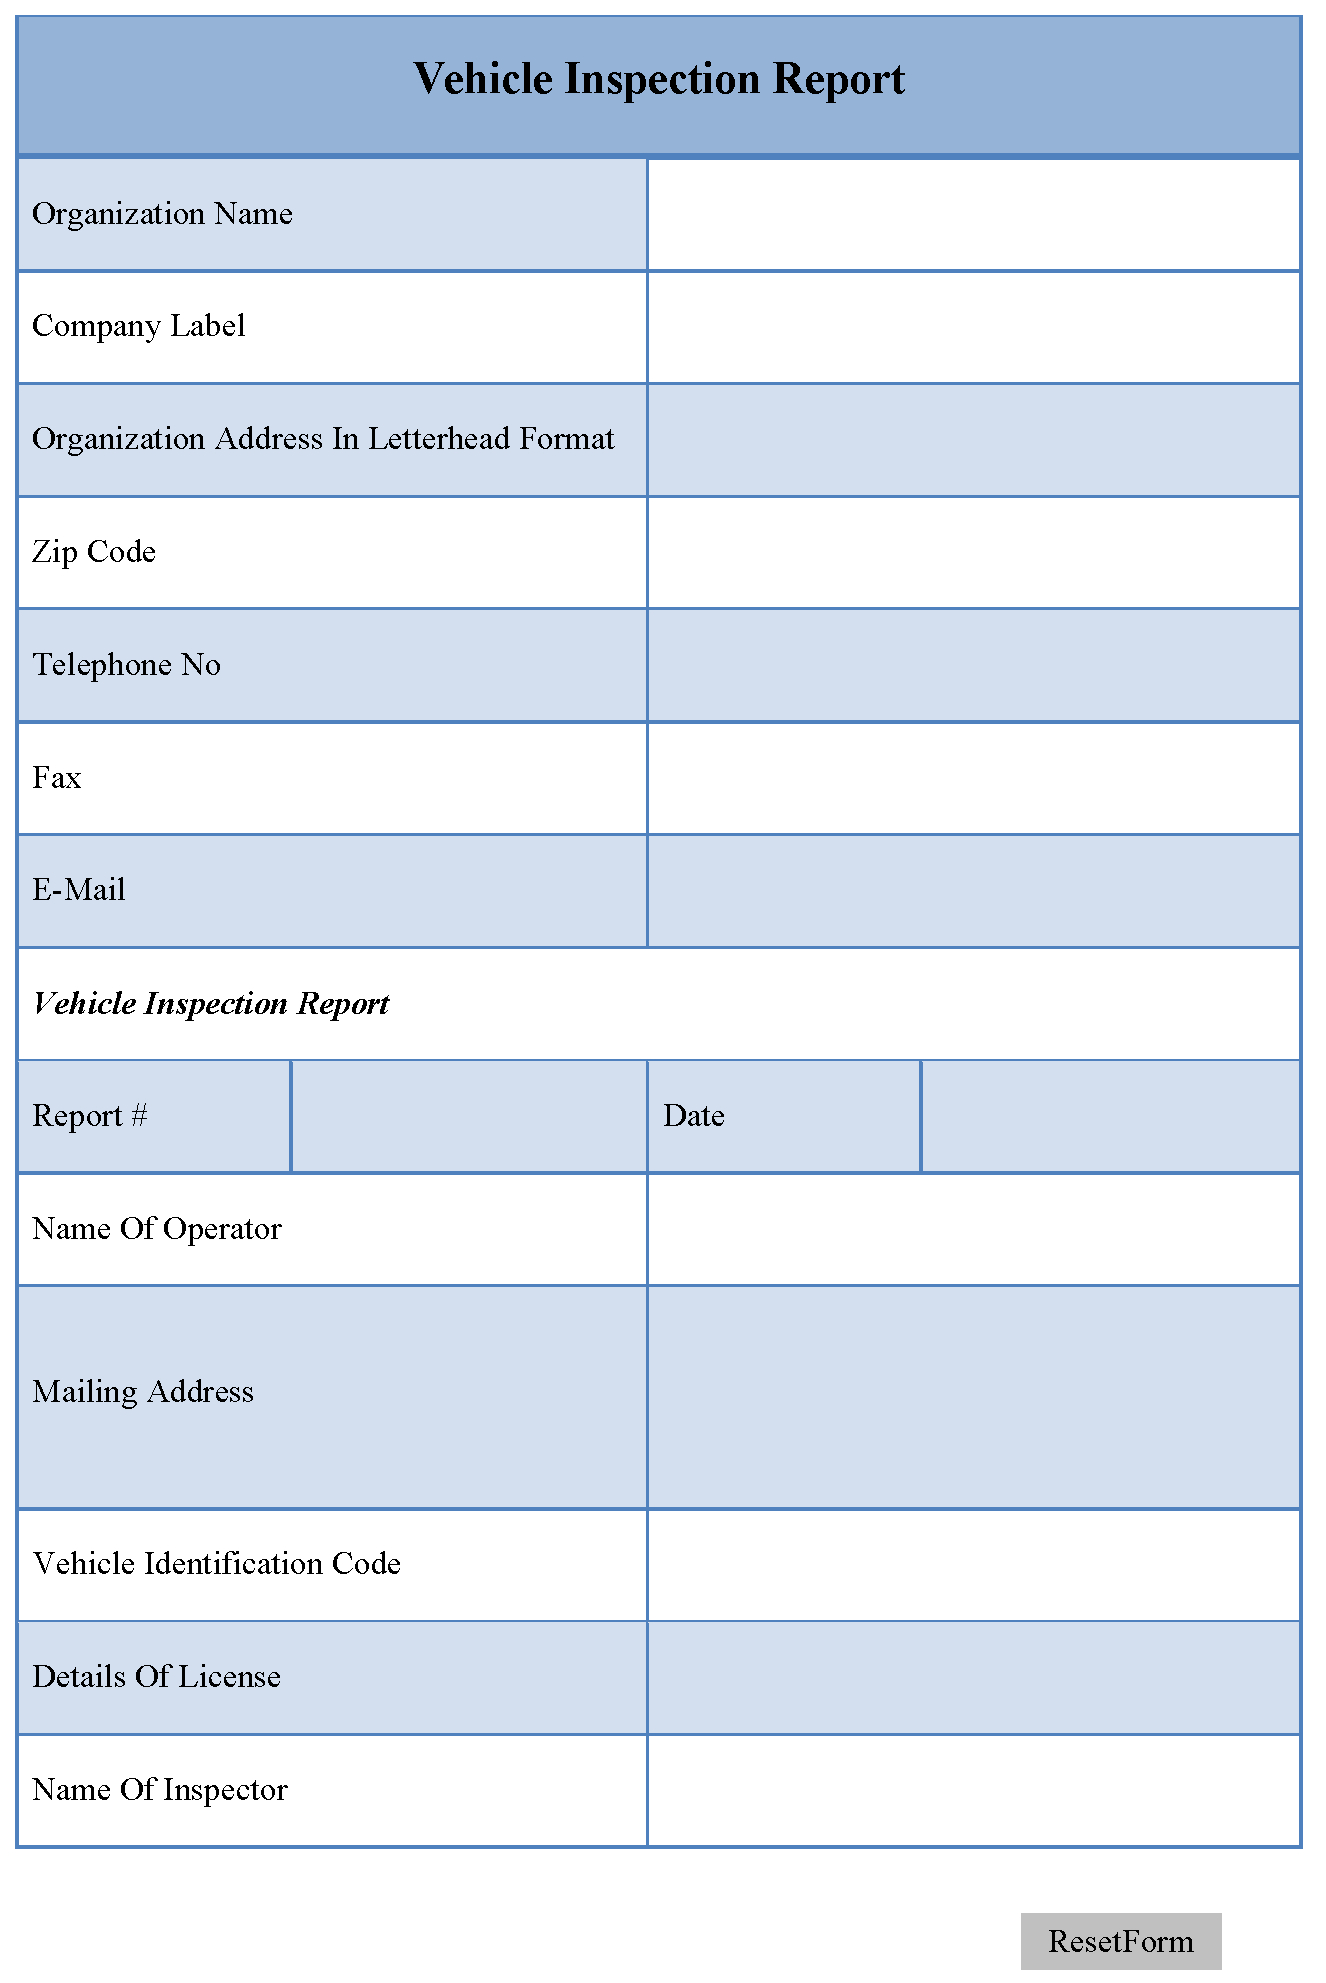 Vehicle Inspection Report Template | Editable Forms Within Vehicle Inspection Report Template